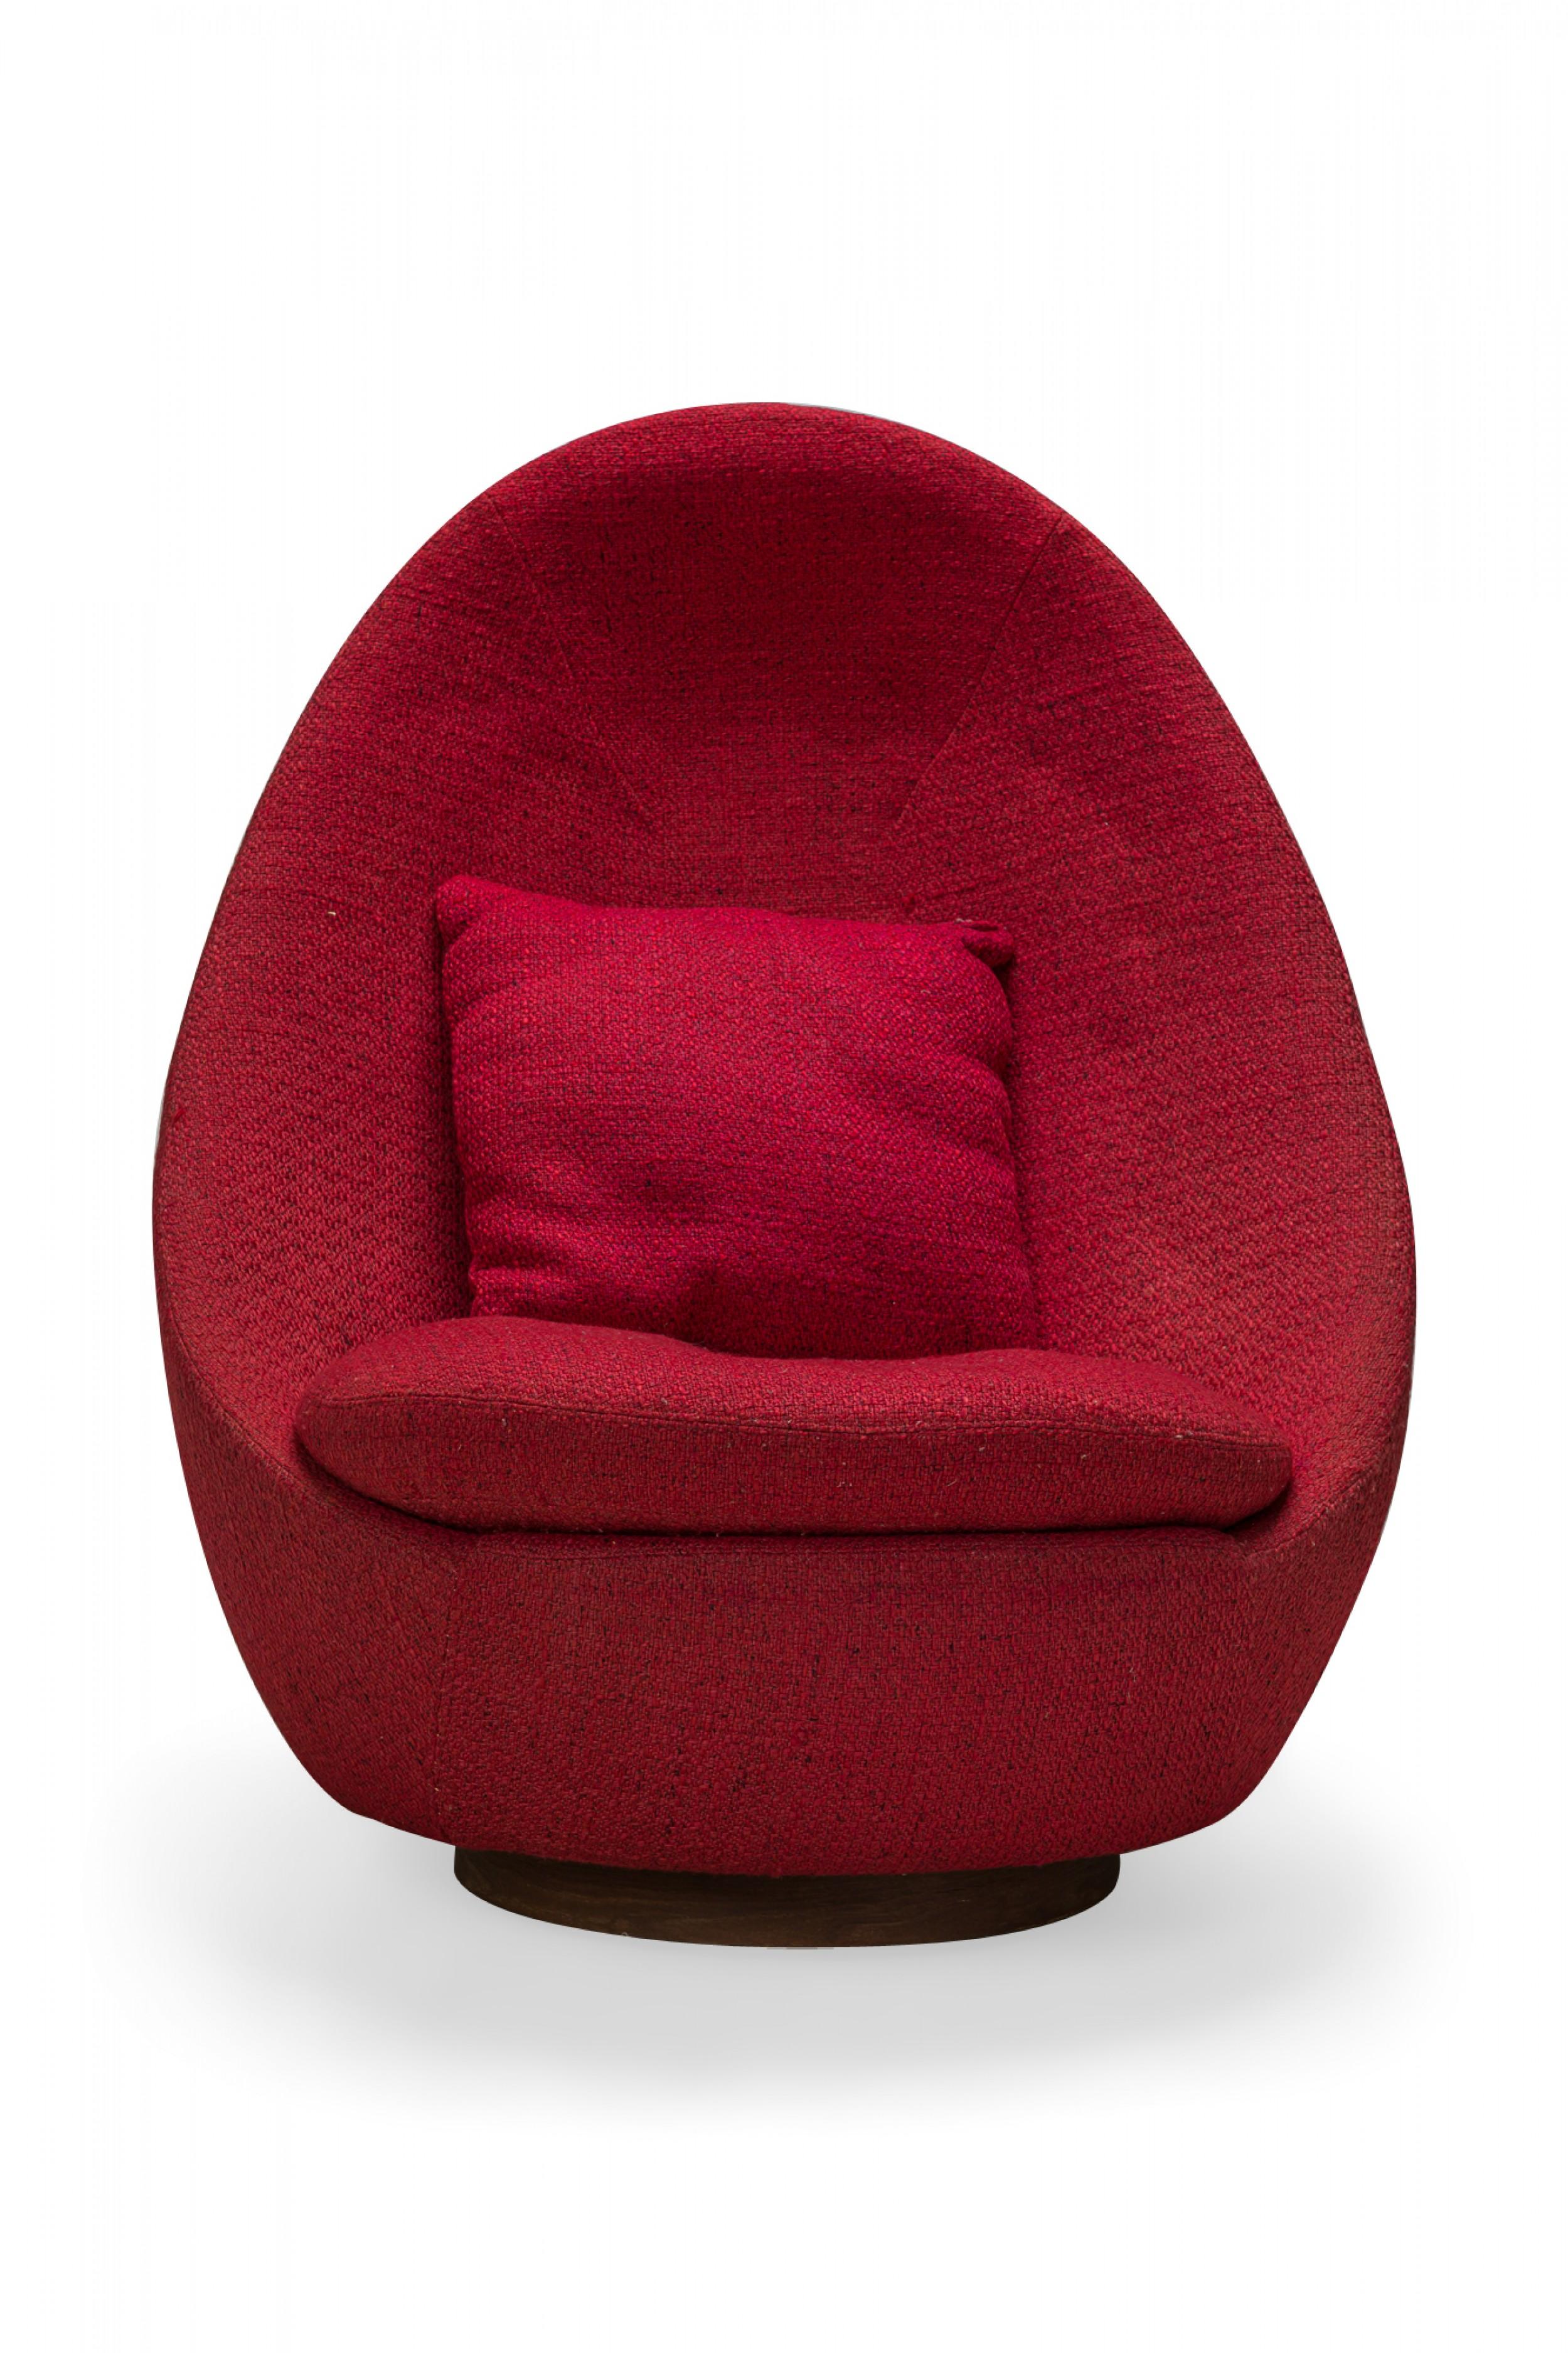 American Mid-Century swivel egg chair with a curved form upholstered in textured light red upholstery with a matching throw pillow. (MILO BAUGHMAN)(Available in other fabrics: DUF0341, DUF0342).
 